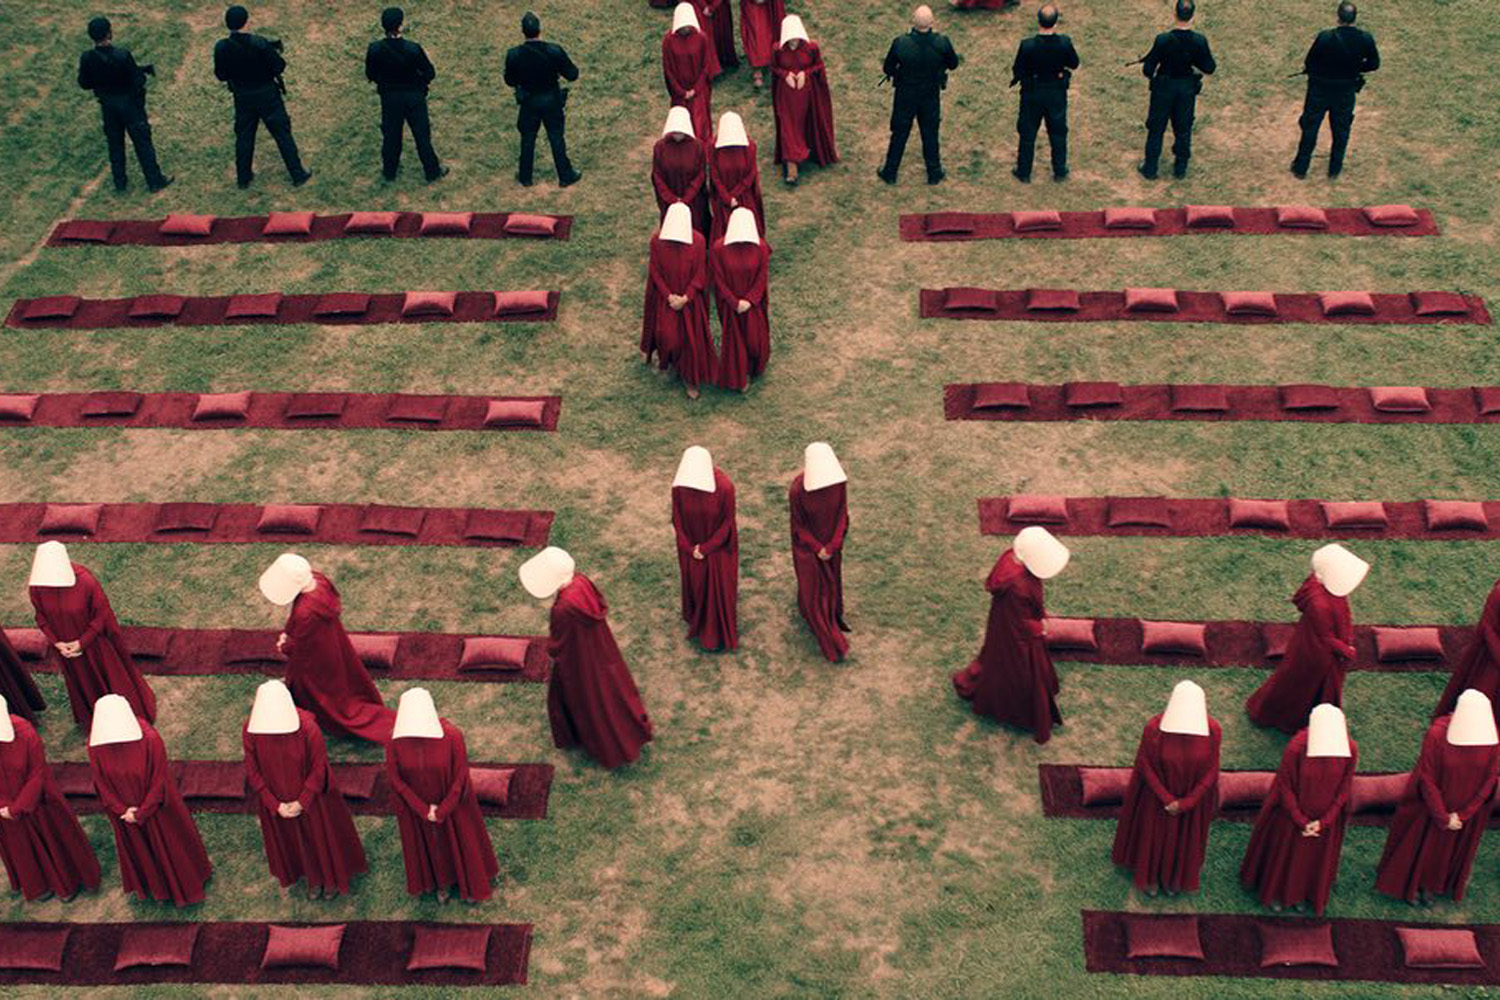 A still from the upcoming Hulu TV series adaptation of Margaret Attwood's 1985 dystopian novel, &quot;The Handmaid's Tale.&quot; (Courtesy Hulu)